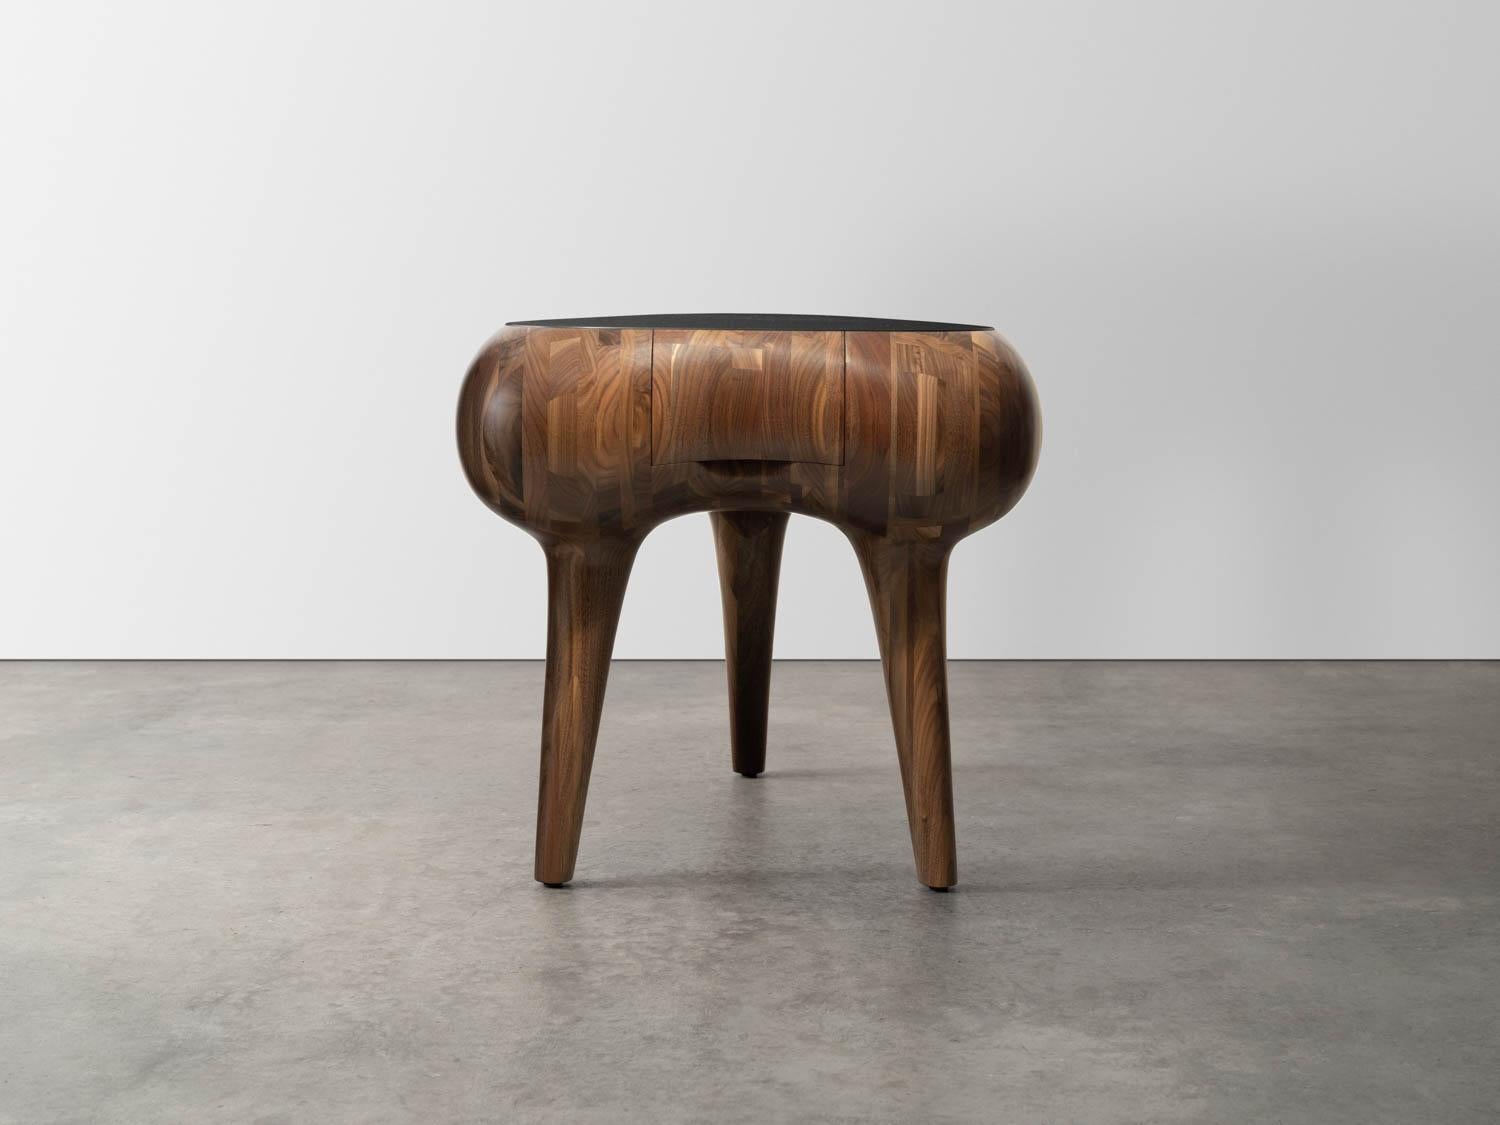 Carved Customizable BLOCK Wooden Side Table by Richard Haining, Shown in Walnut For Sale